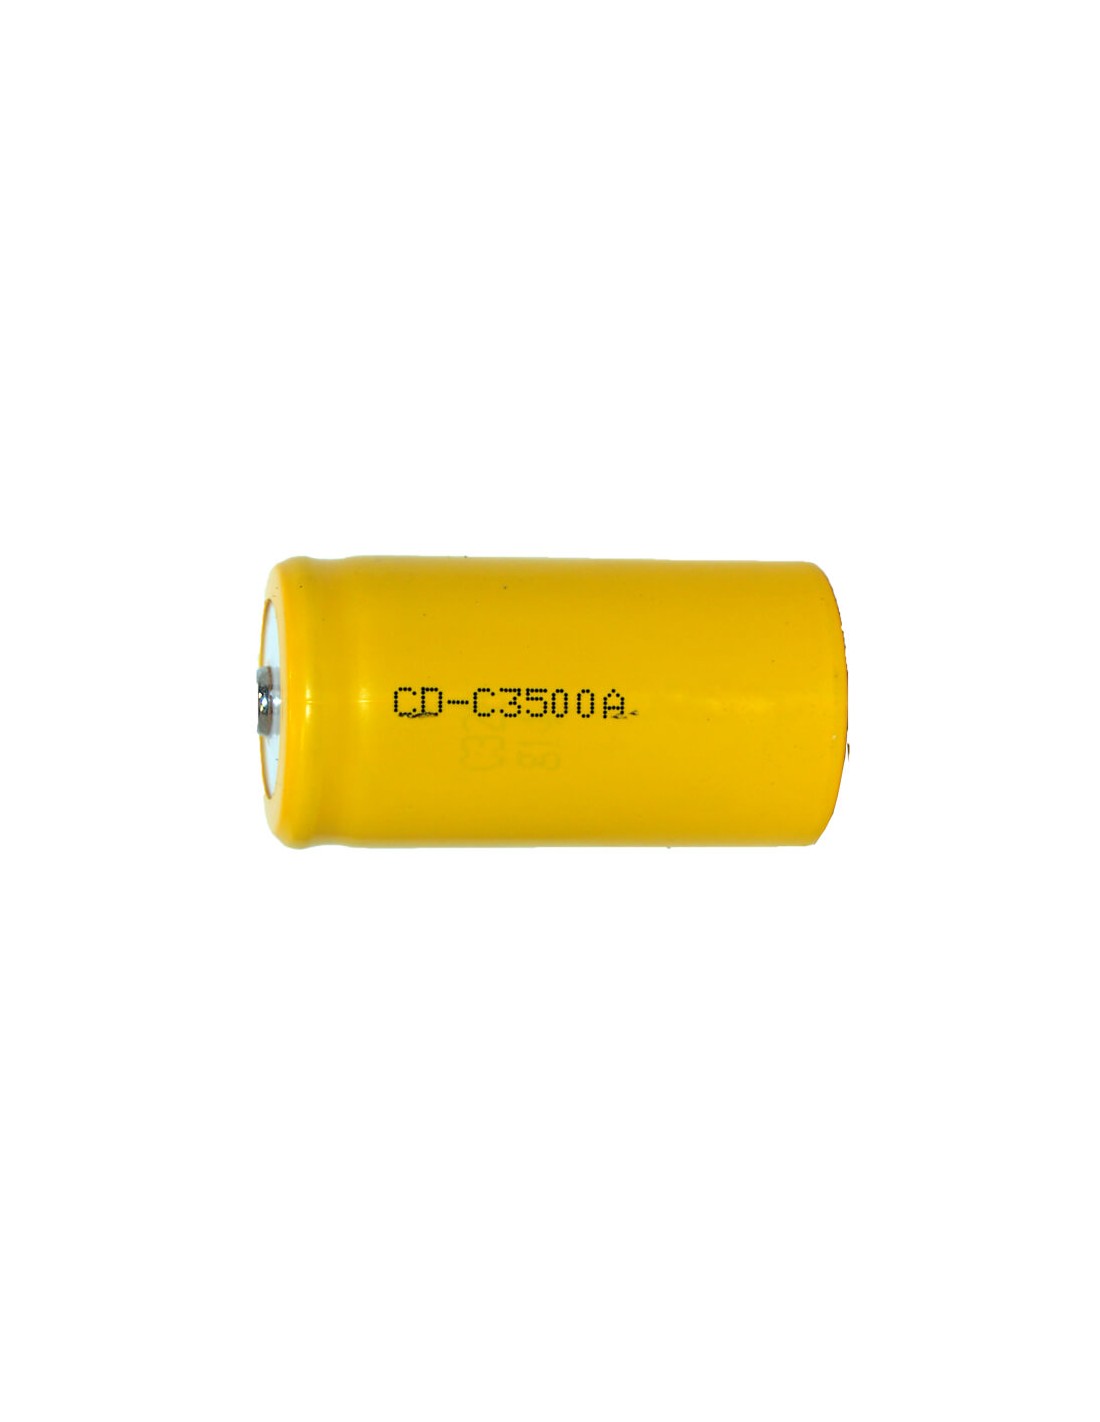 Generic C Button Top NiCd Rechargeable Battery - 3500 mAh